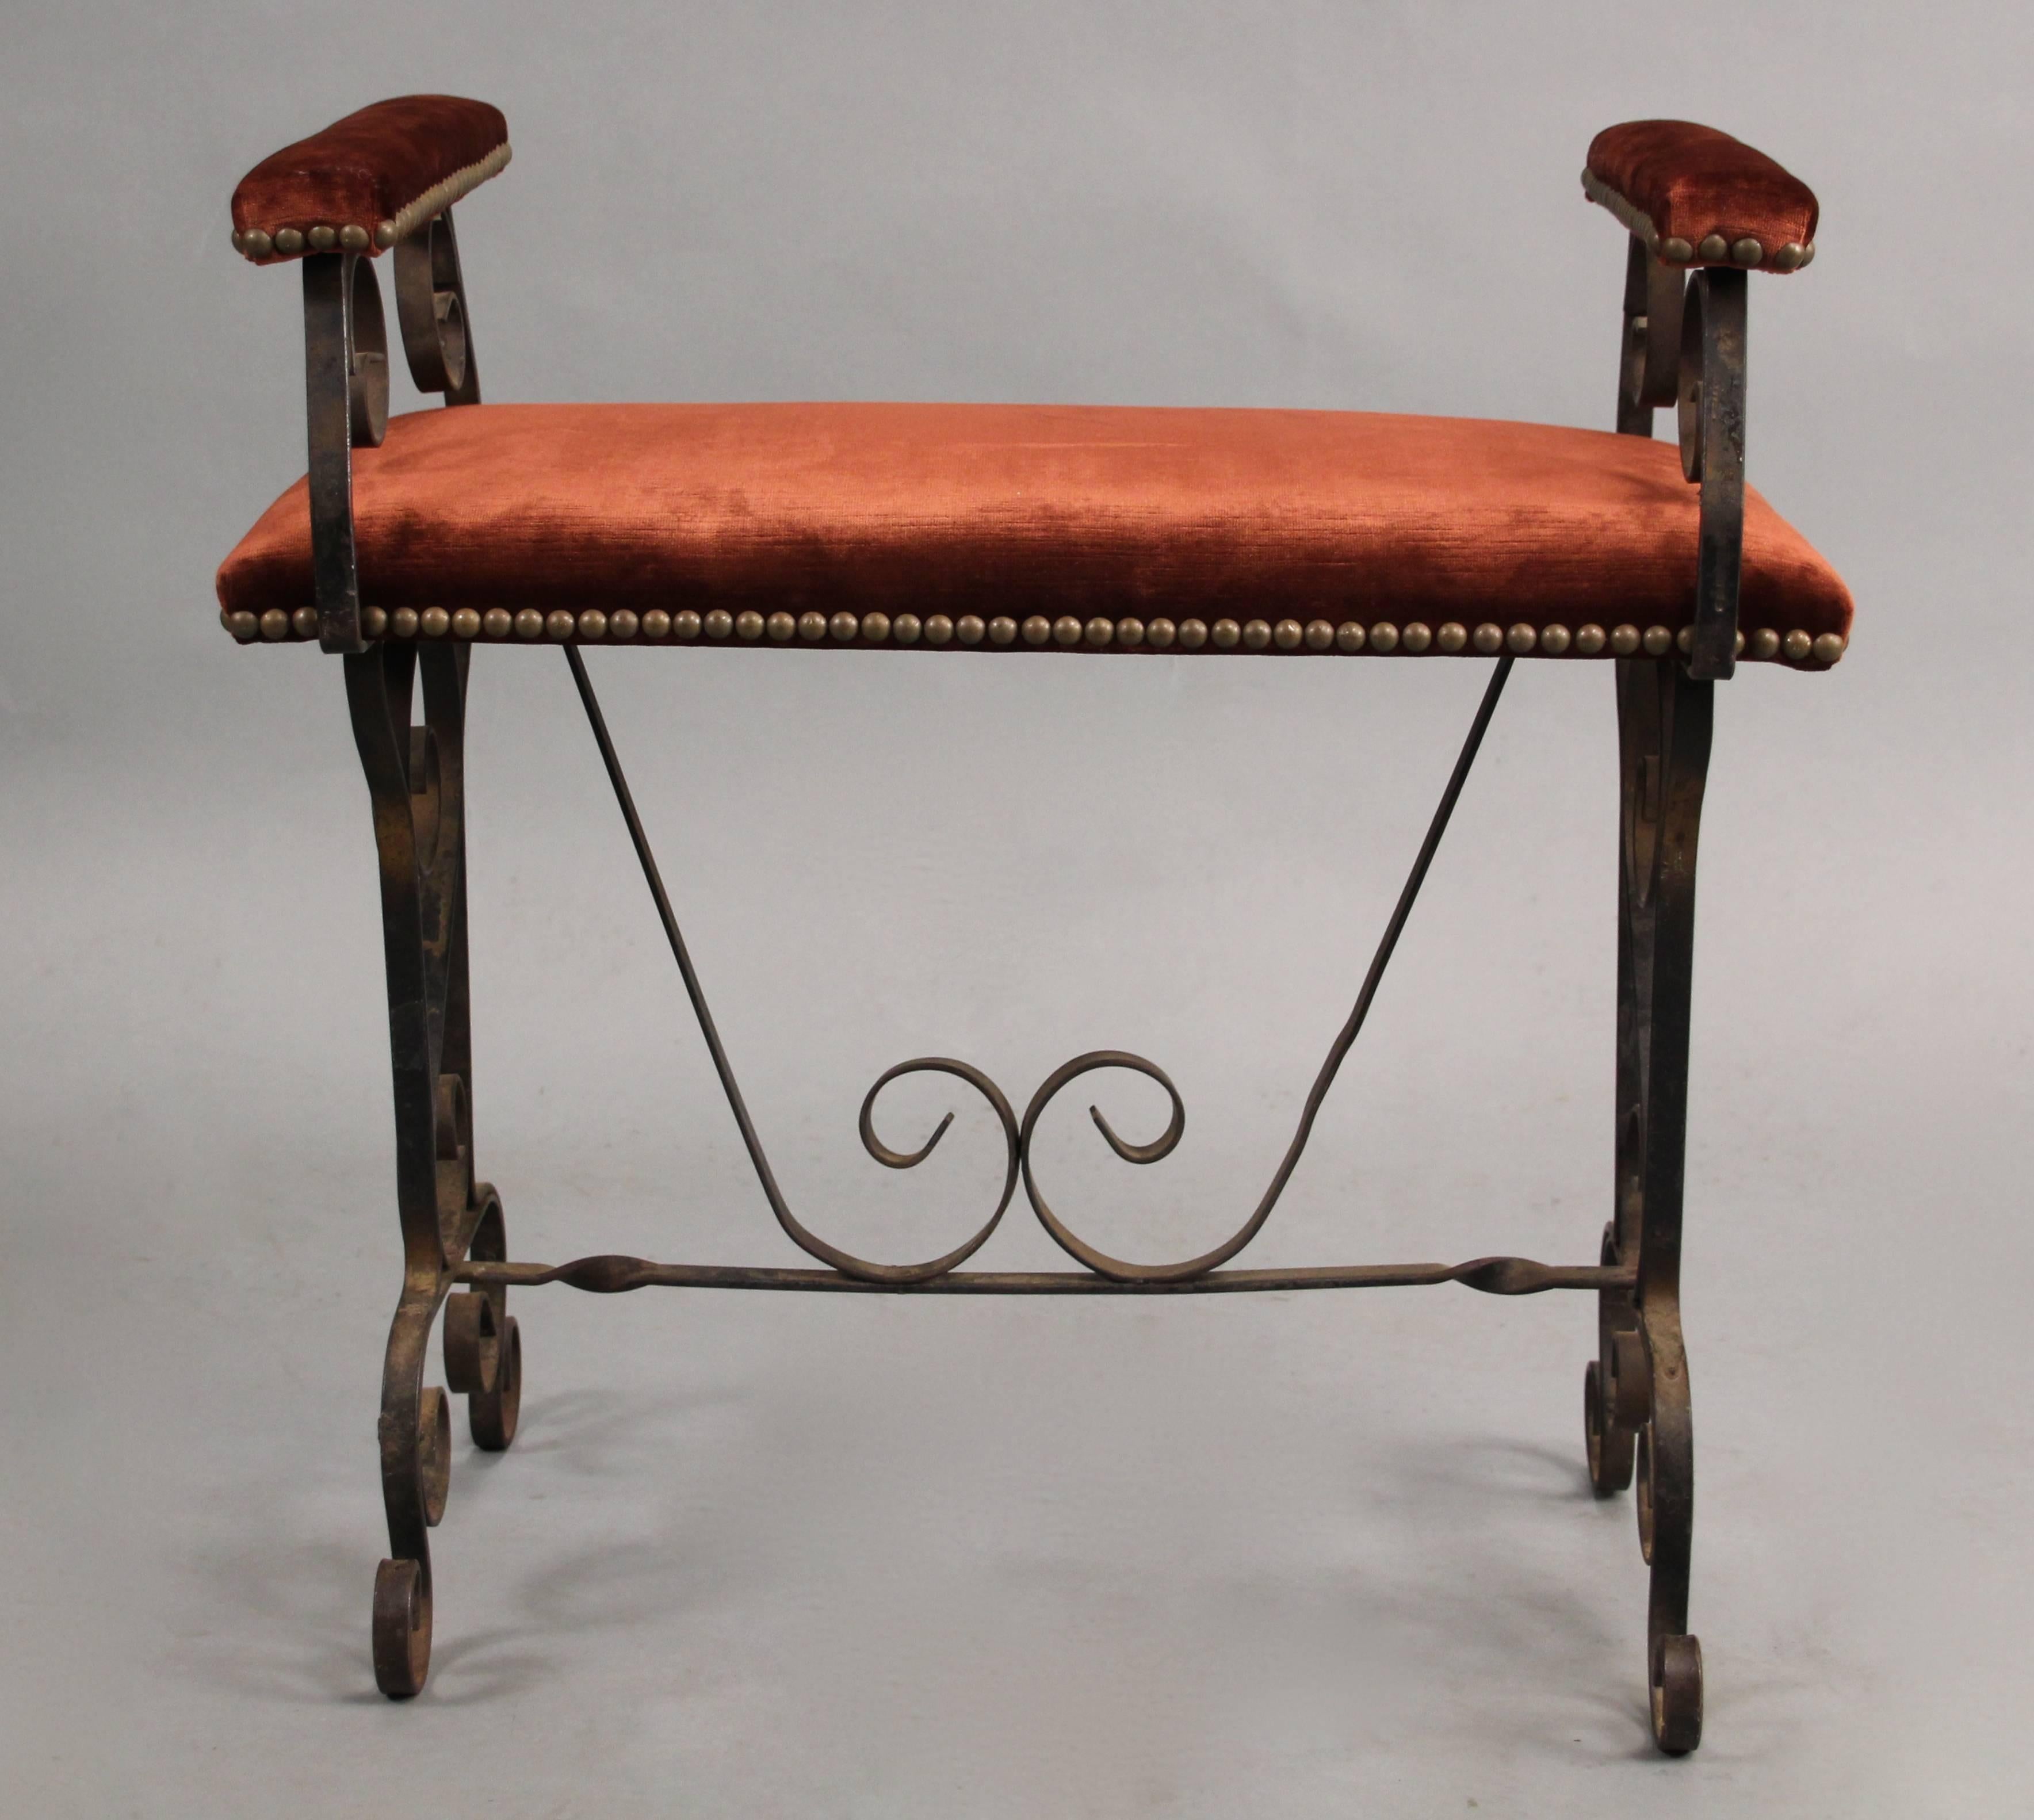 North American 1920s Spanish Revival Iron Bench with Red Velvet Upholstery